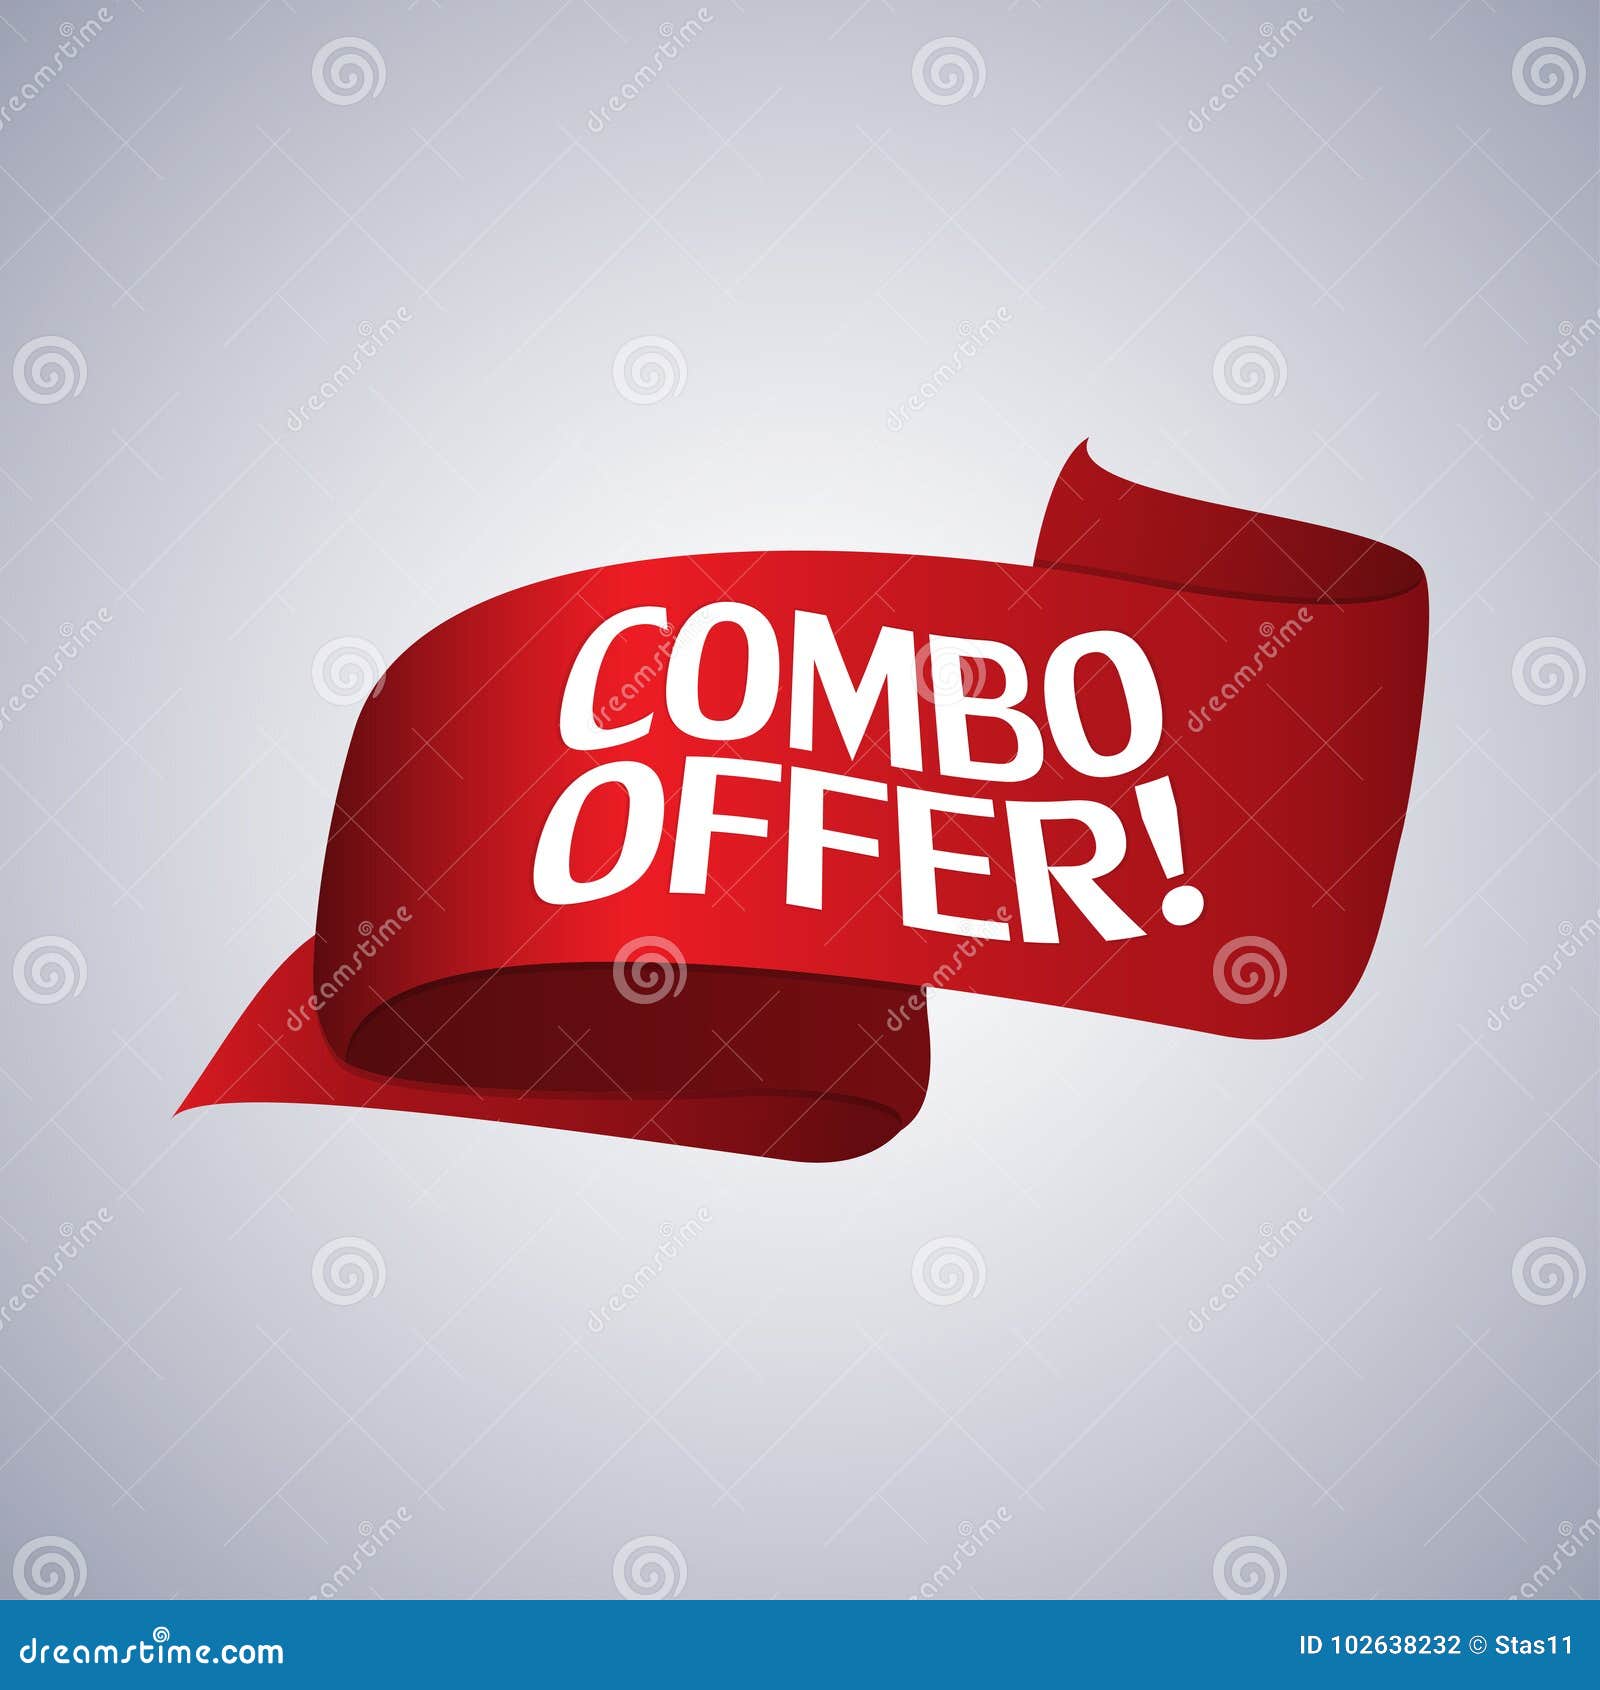 Combo Offer. Red Labels Banners Stock Vector - Illustration of promotion,  notification: 102638232